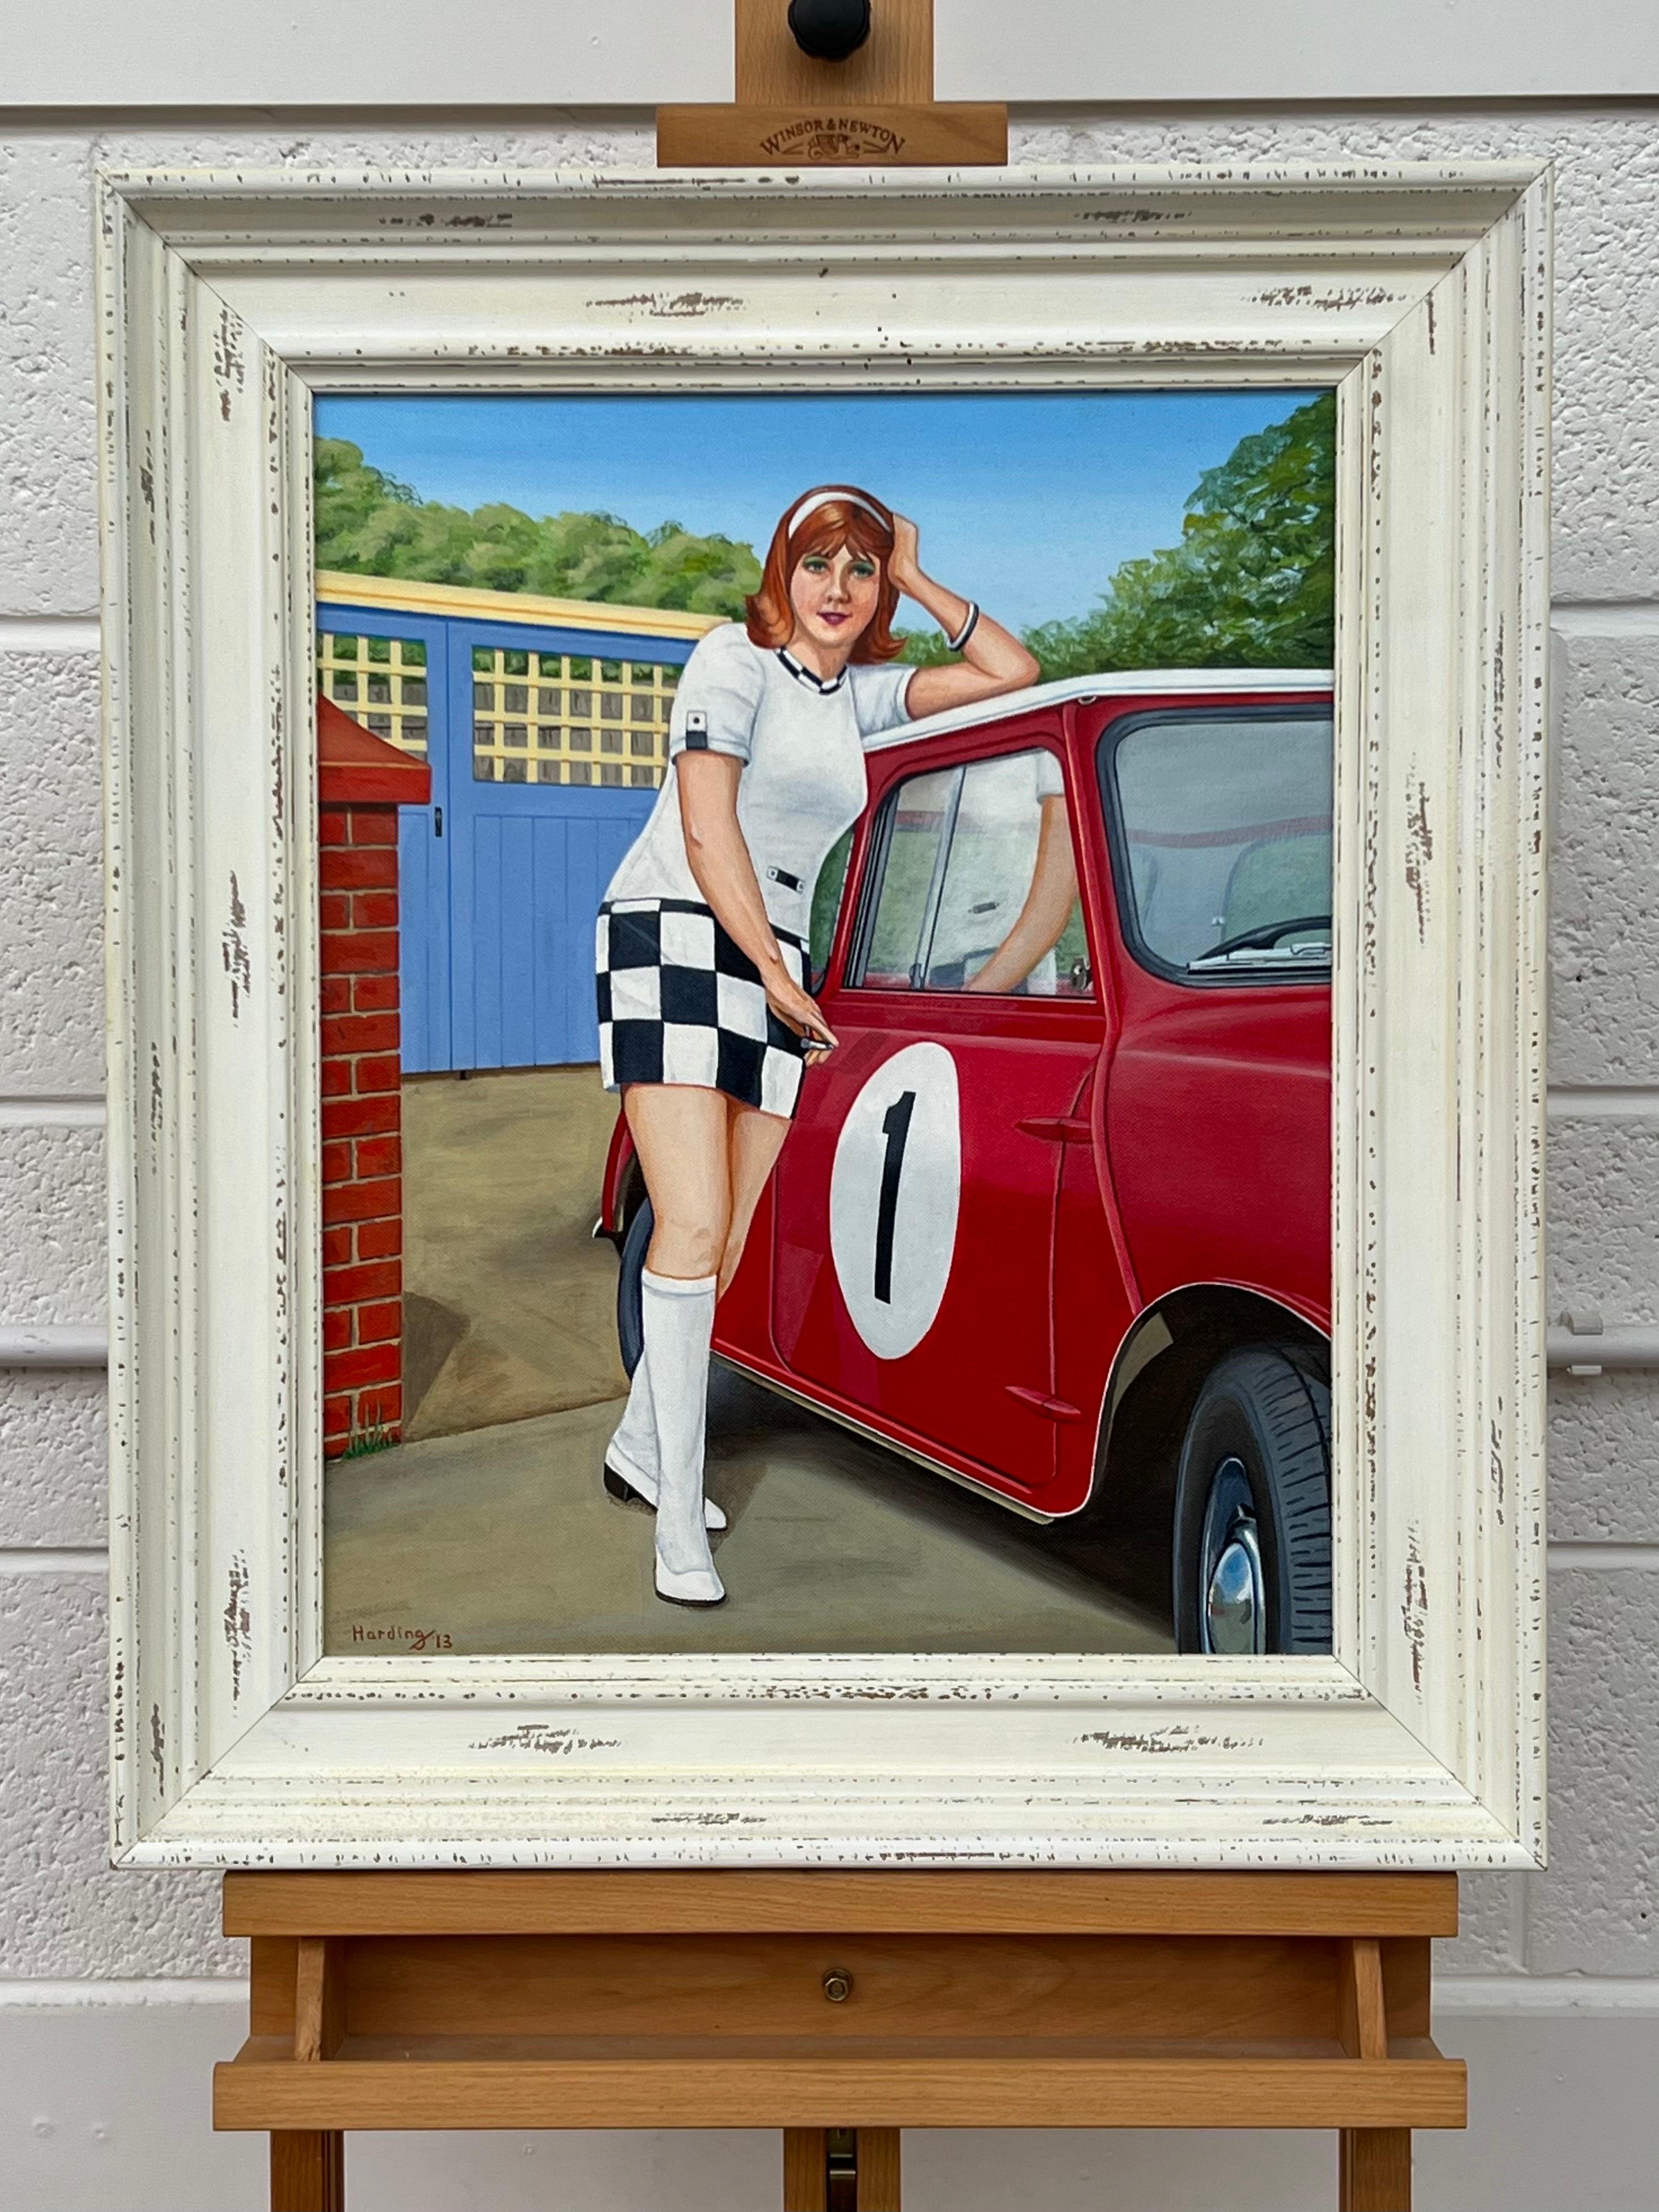 'A Racy Little Number’ a Woman with a Red Austin Mini Car in 1970's England, by Retro Nostalgic Artist, Paul F Harding. Signed, Original, Acrylic on Canvas. Presented in a high quality off-white shabby chic frame. 

Art measures 20 x 16 inches